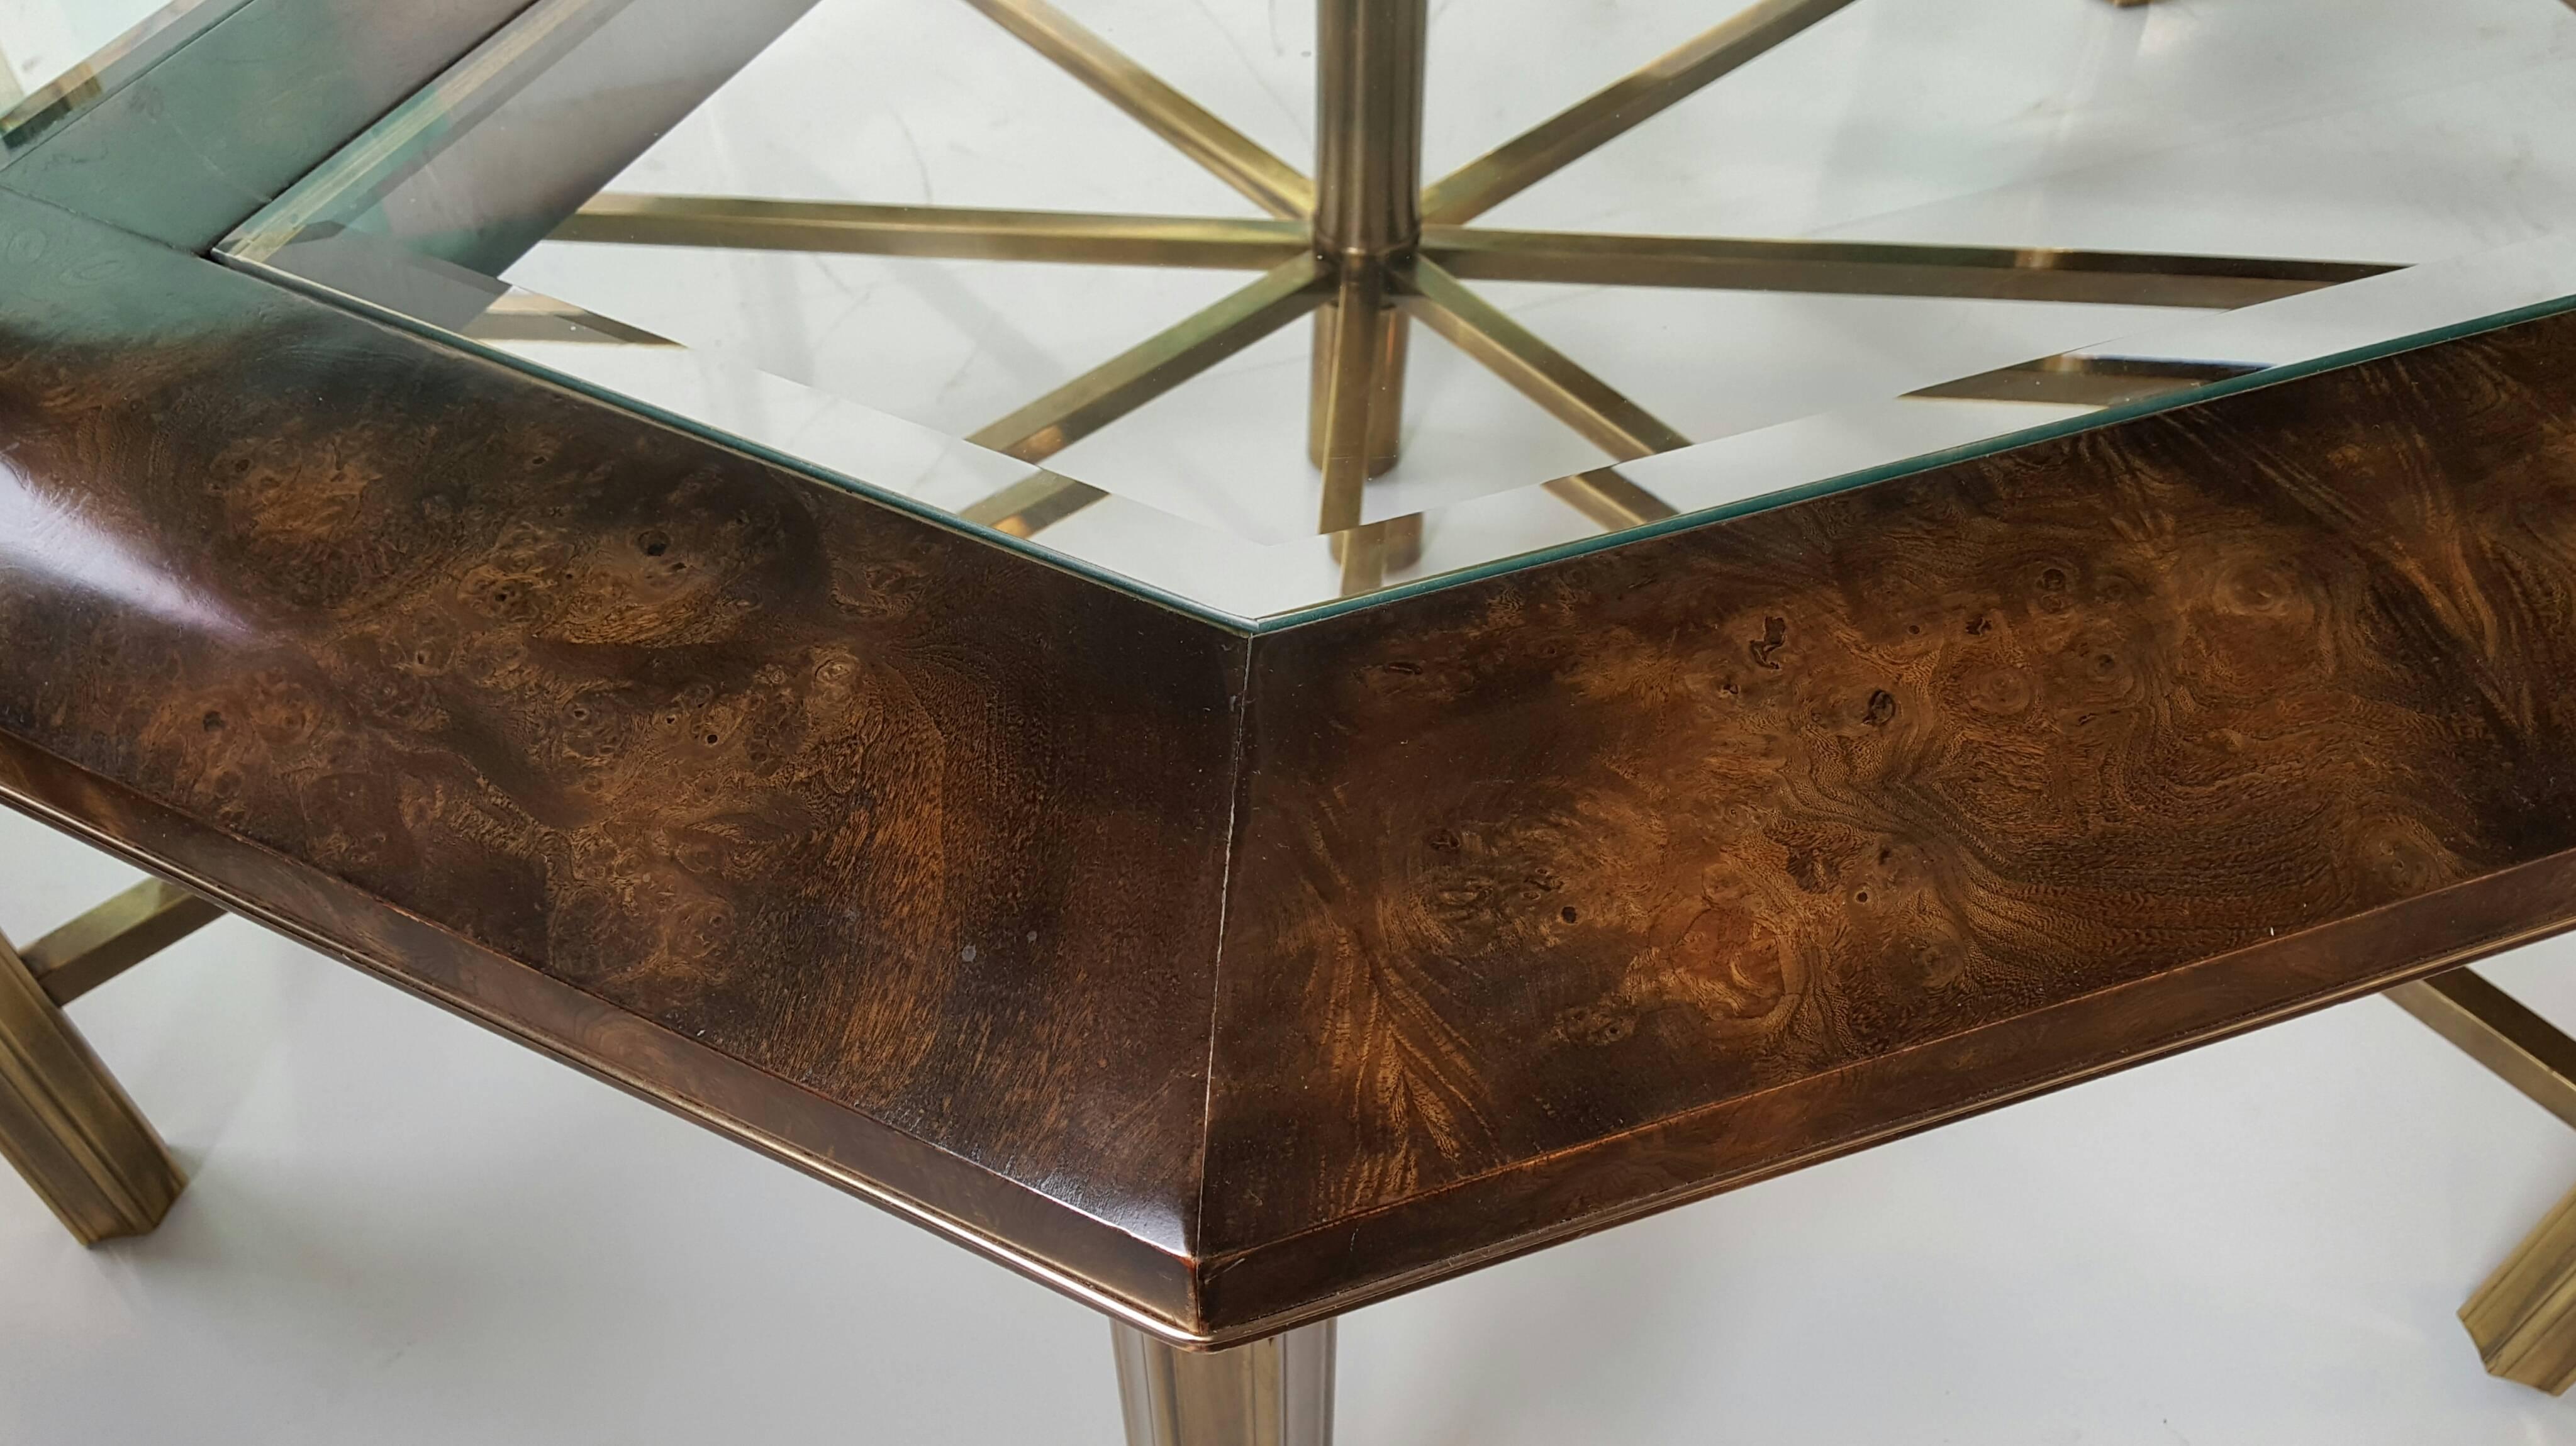 Rare eight-sided dining table manufactured by Mastercraft, finest of quality, constructed of burl elm, fabulous figuring, polished brass base and inlay, bevel glass inserts. Very limited production. One of five ever produced.